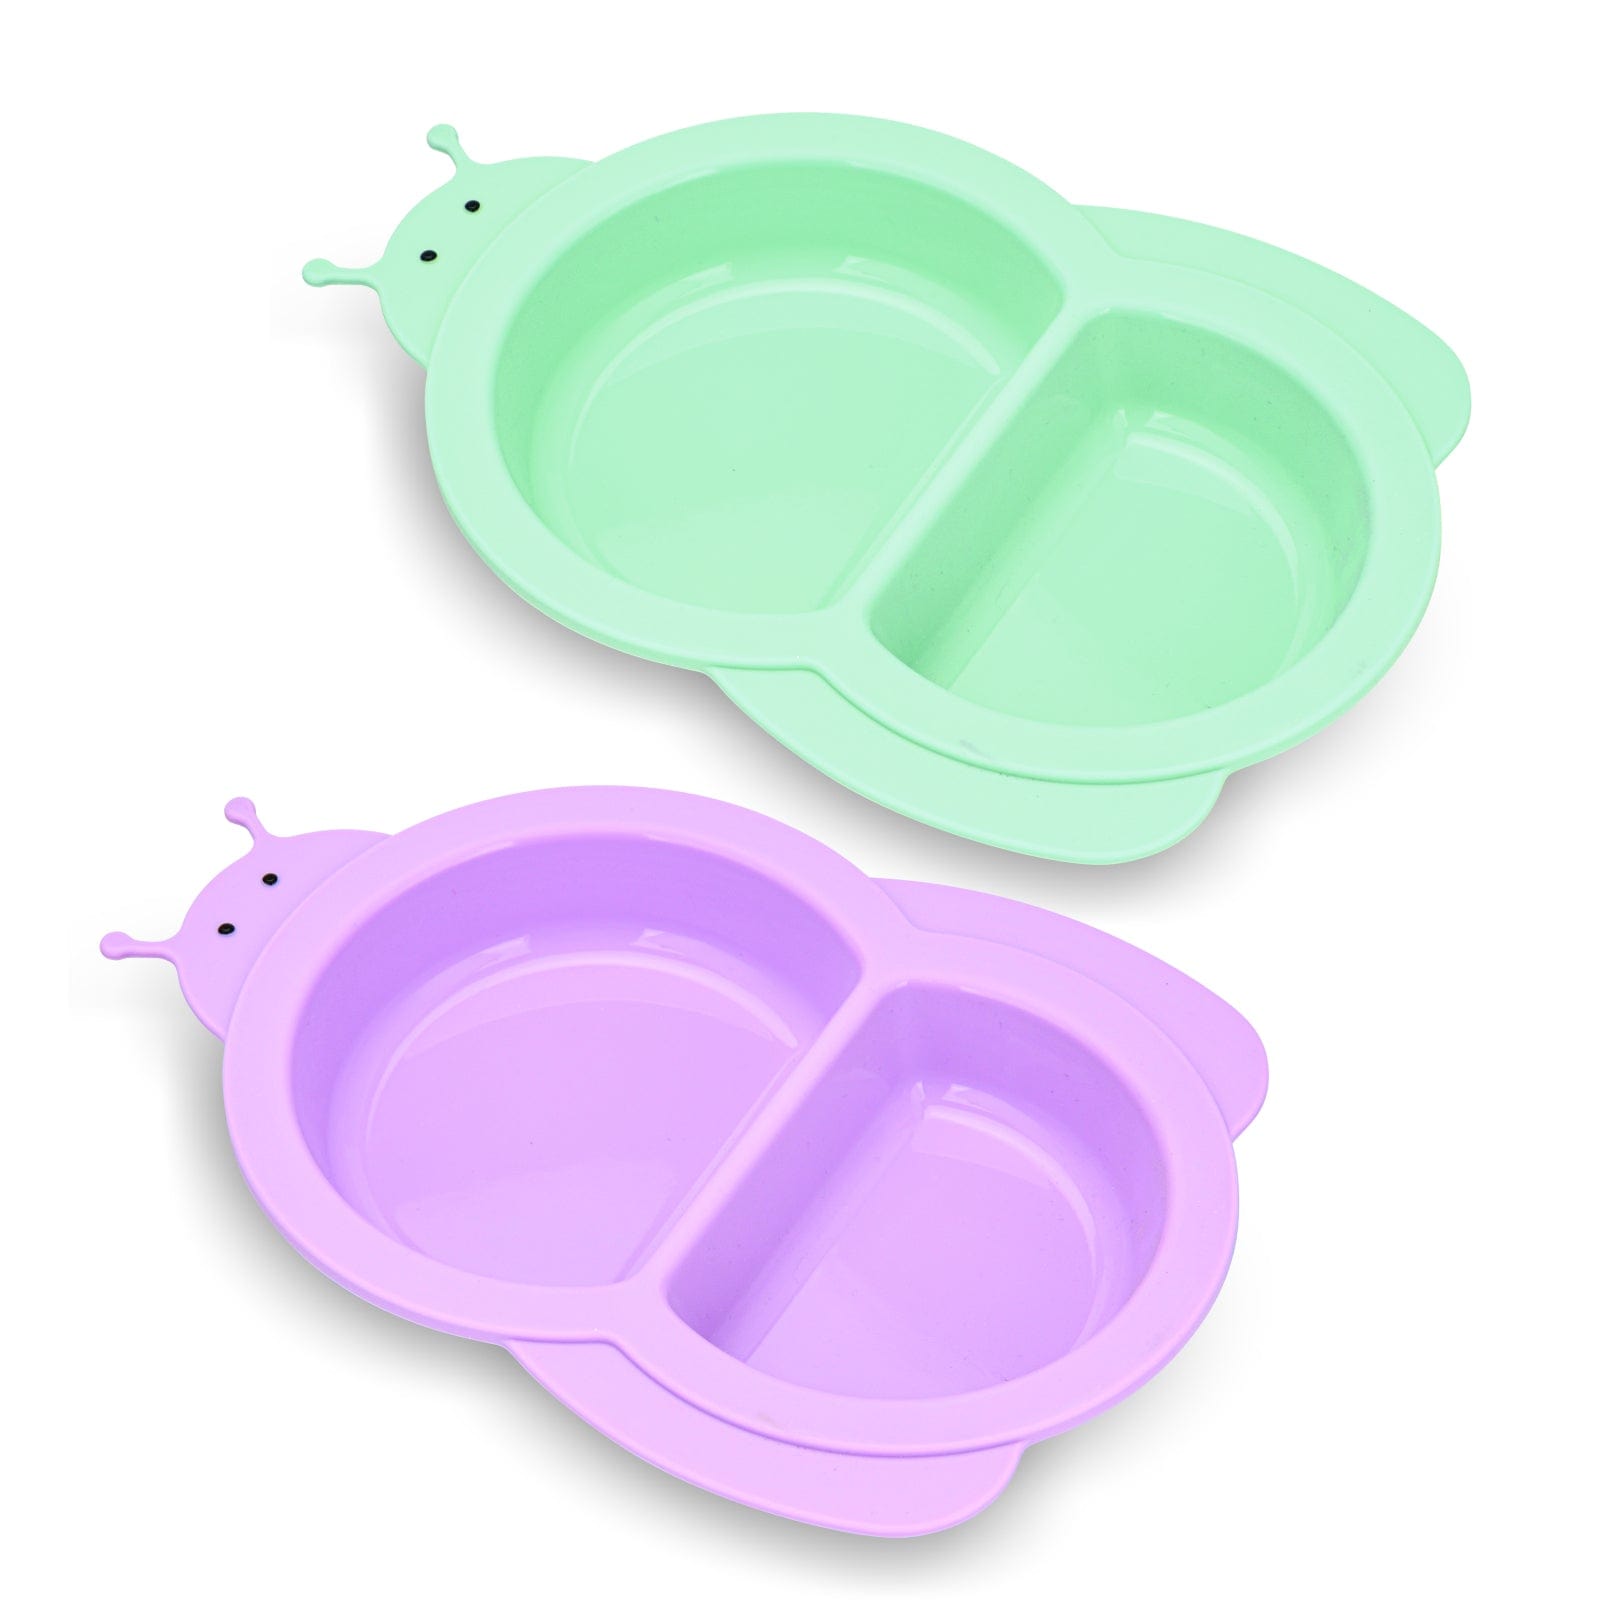 Fissman Silicone Divided Bowl For Kids Mint Green 340ml